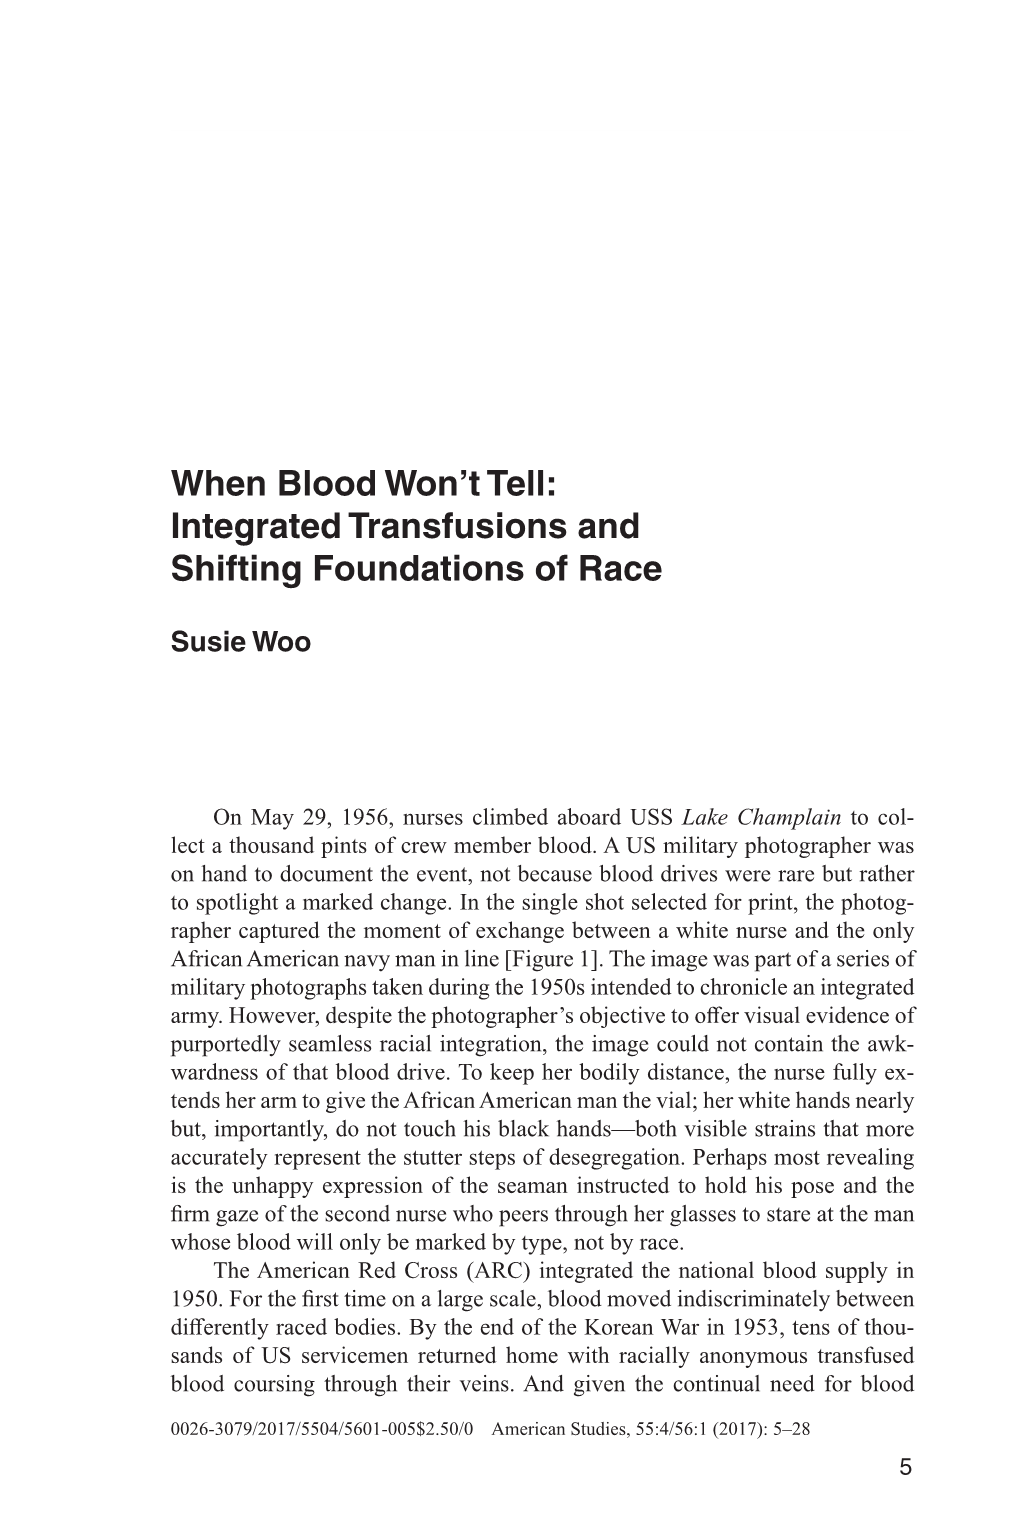 When Blood Won't Tell: Integrated Transfusions and Shifting